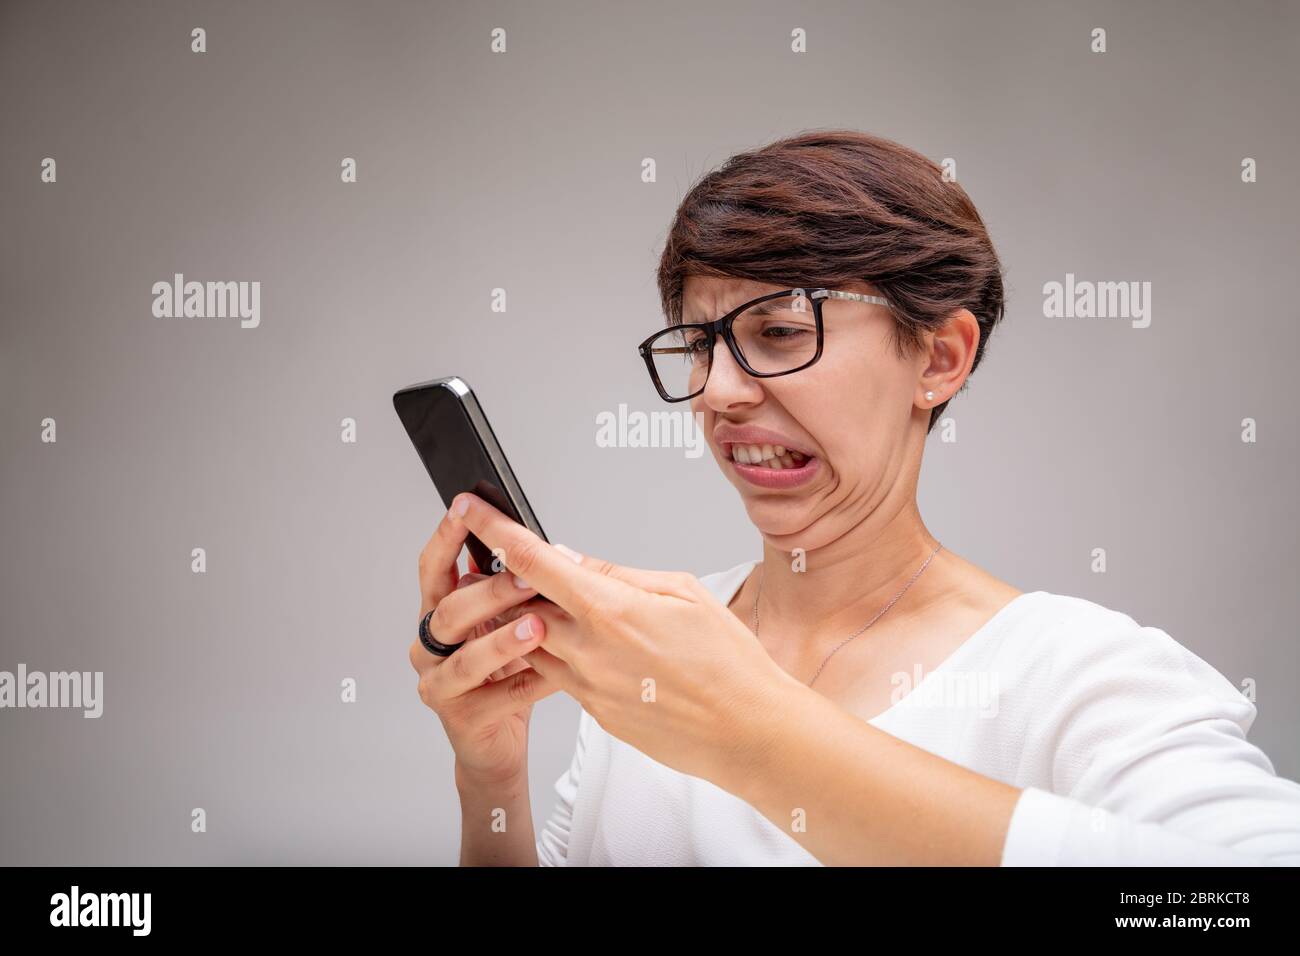 Woman reacting in revulsion to her mobile phone grimacing and pulling a face showing her repugnance in a close up portrait Stock Photo